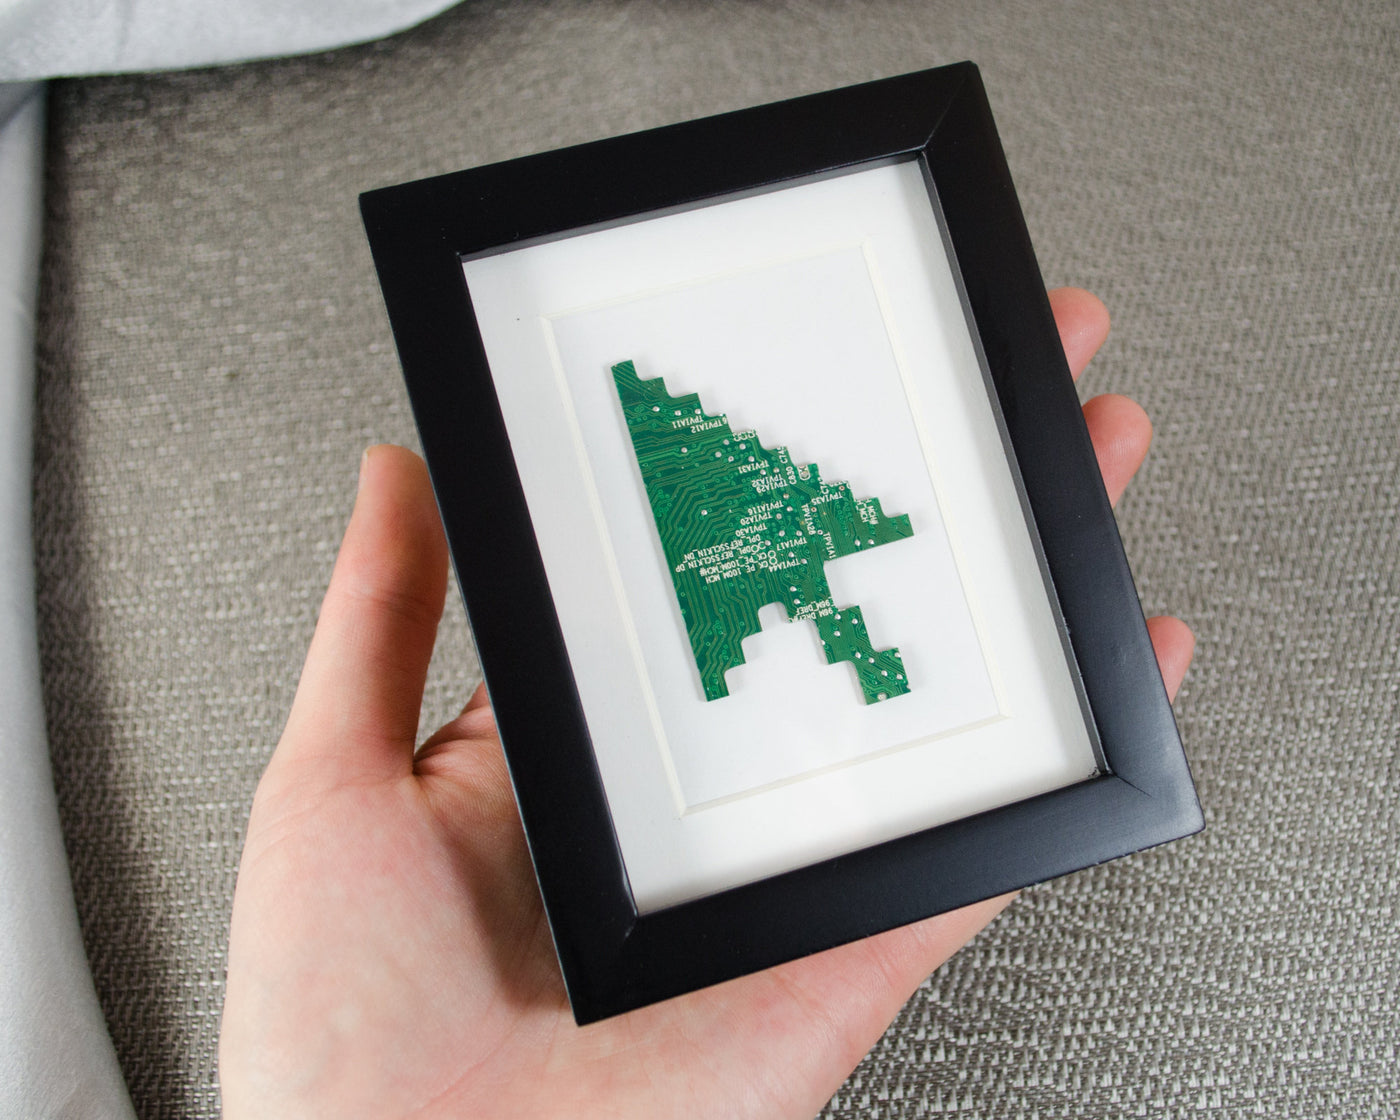 pixelated cursor art handmade from recycled circuit board